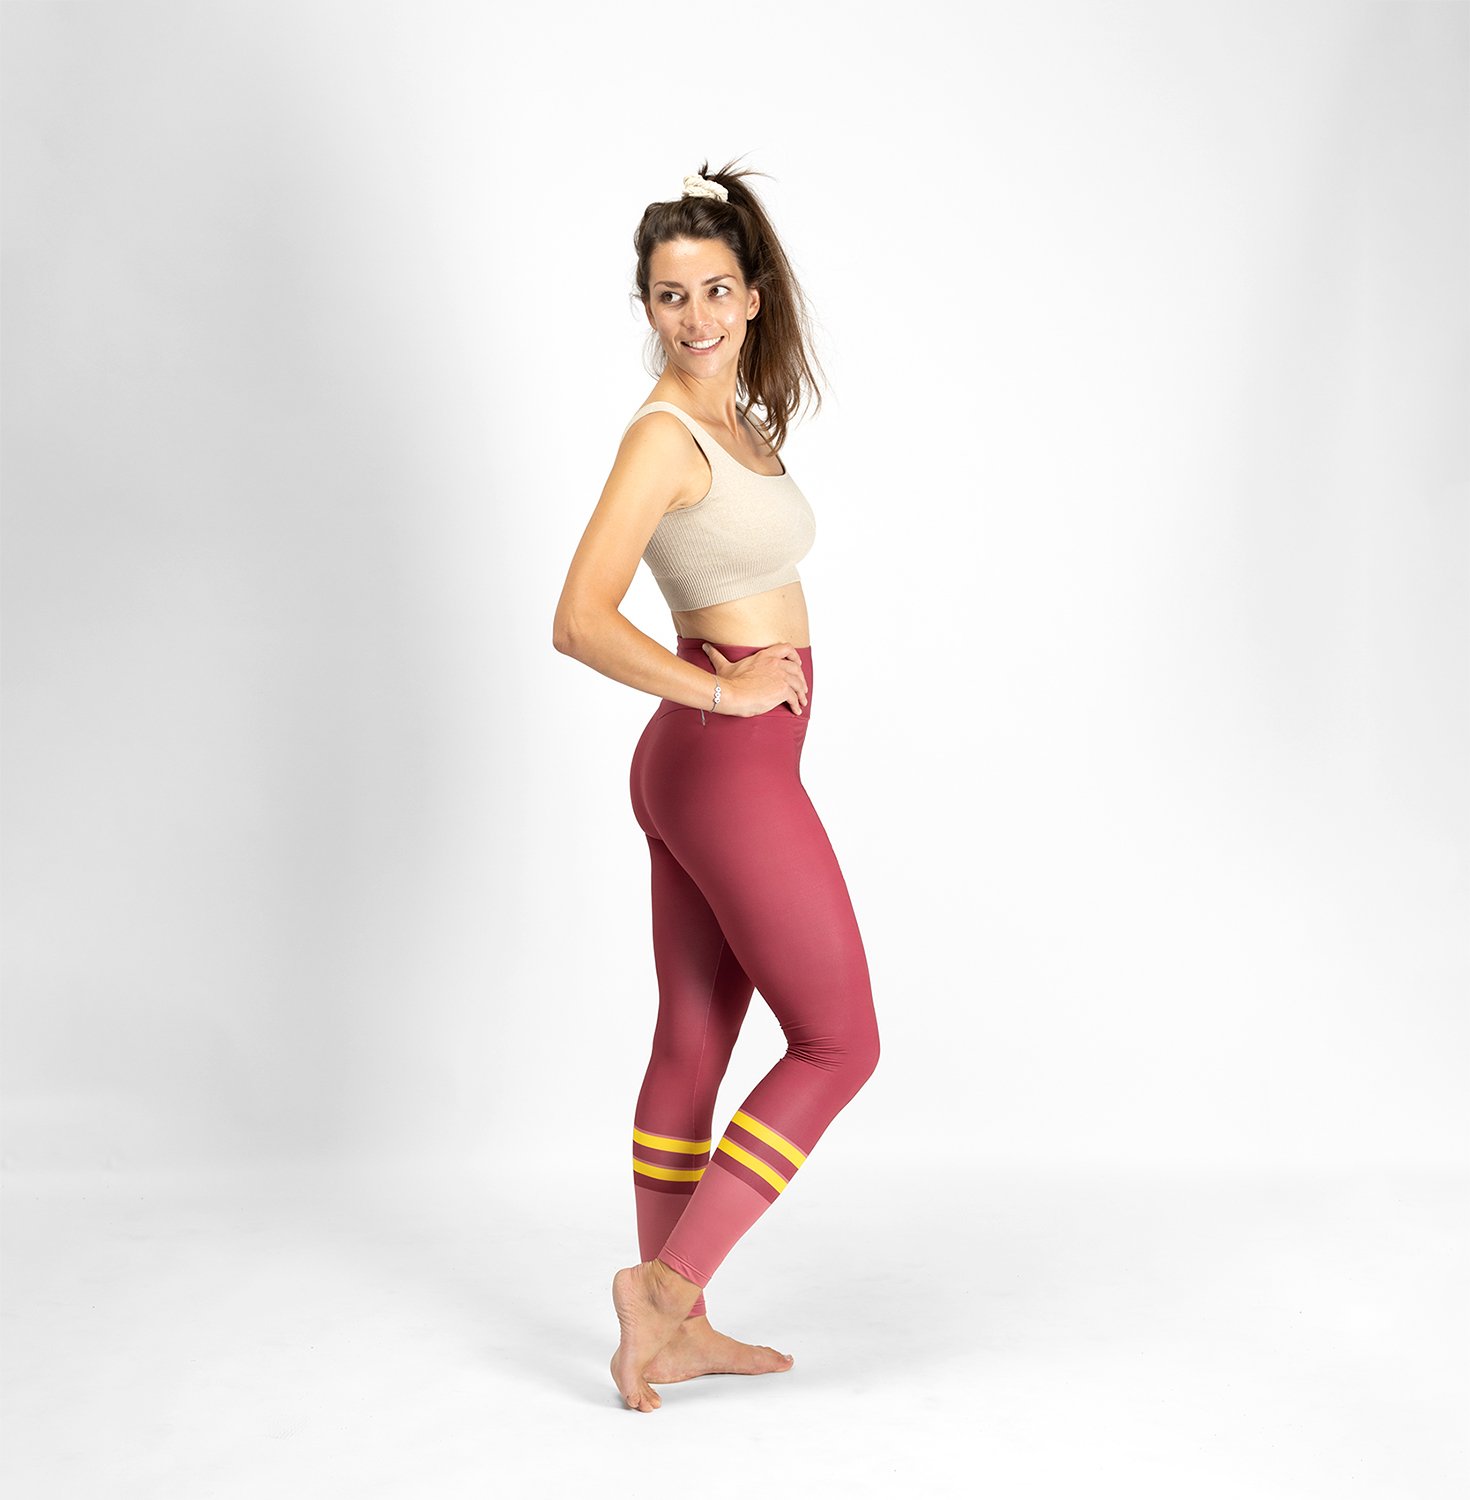 canada yoga pants, canada yoga pants Suppliers and Manufacturers